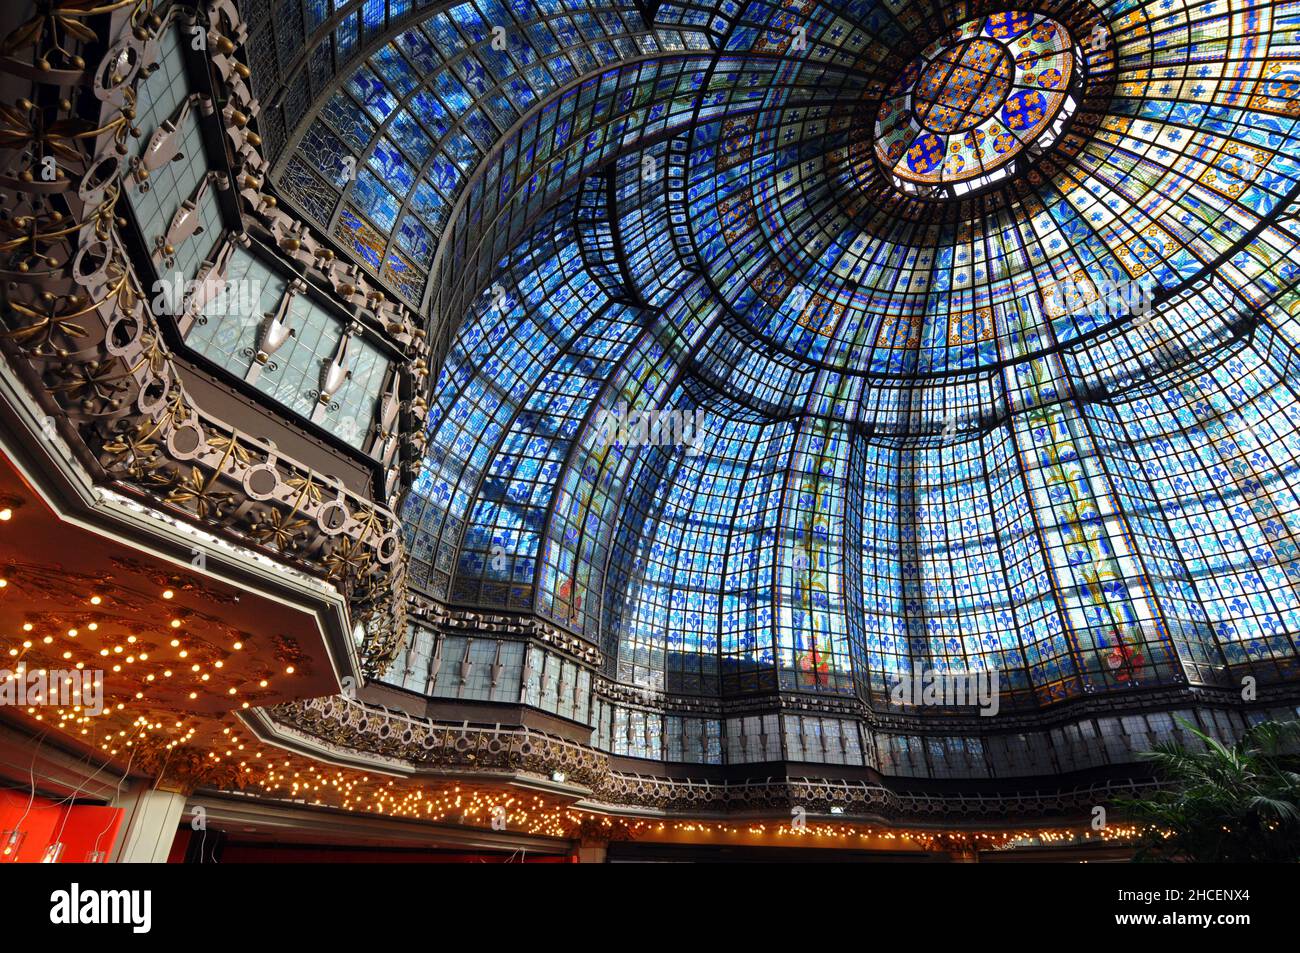 An ornate stained glass dome covers Brasserie Printemps, a restaurant at the flagship Printemps department store on Boulevard Haussmann in Paris. Stock Photo